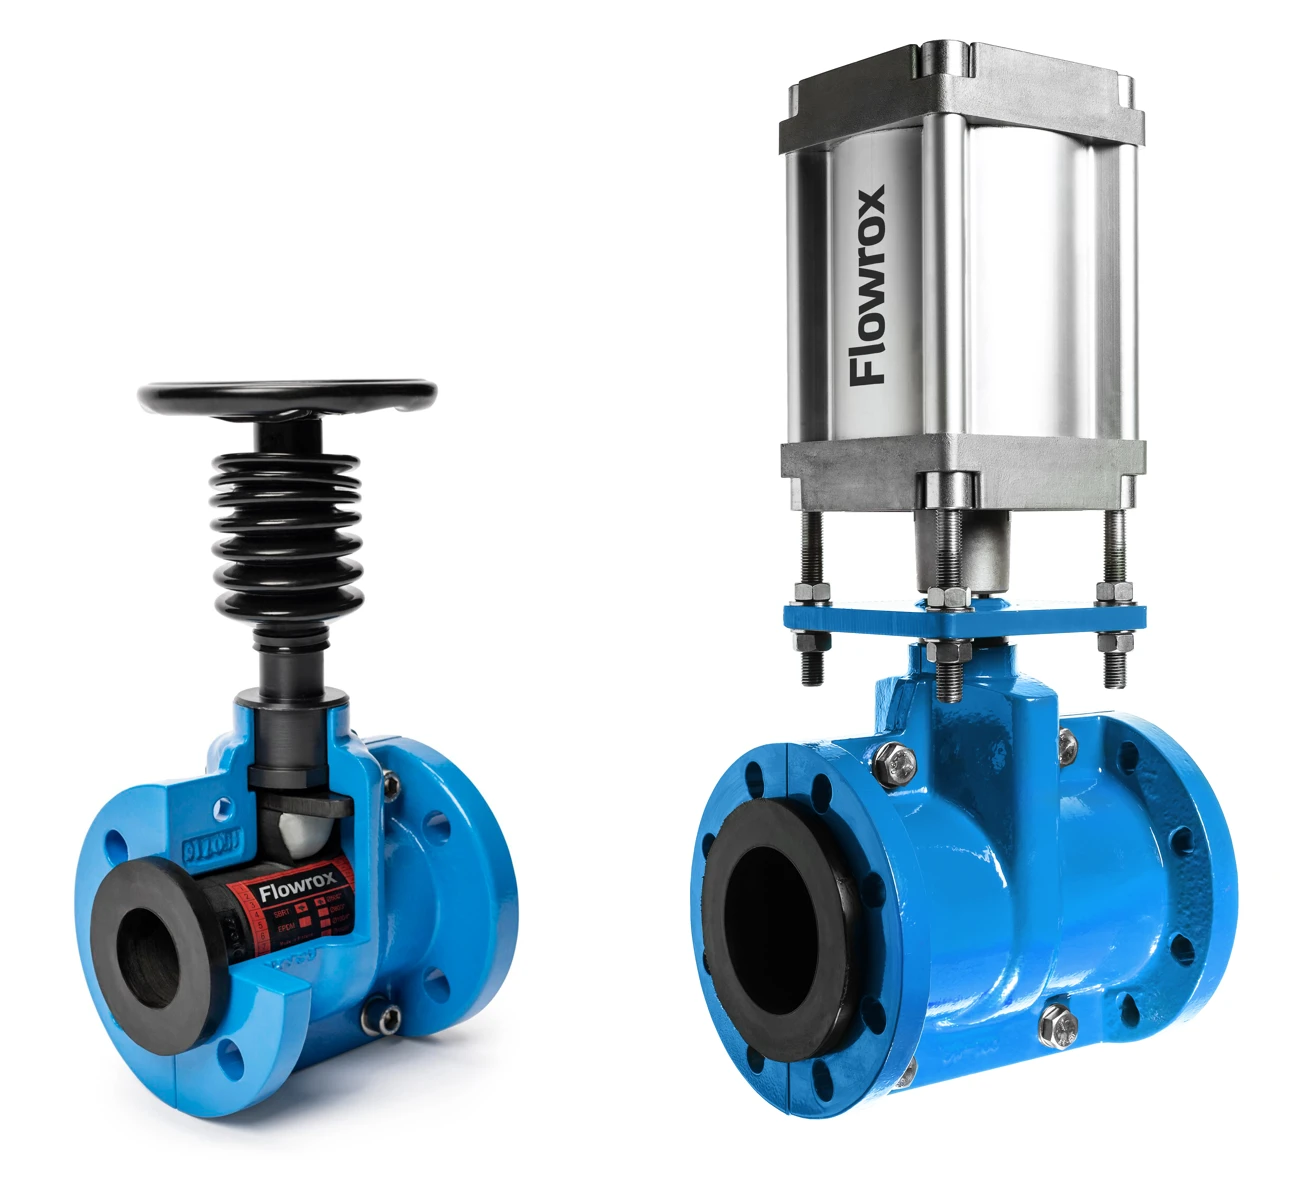 Flowrox PVG and PVEG pinch valves